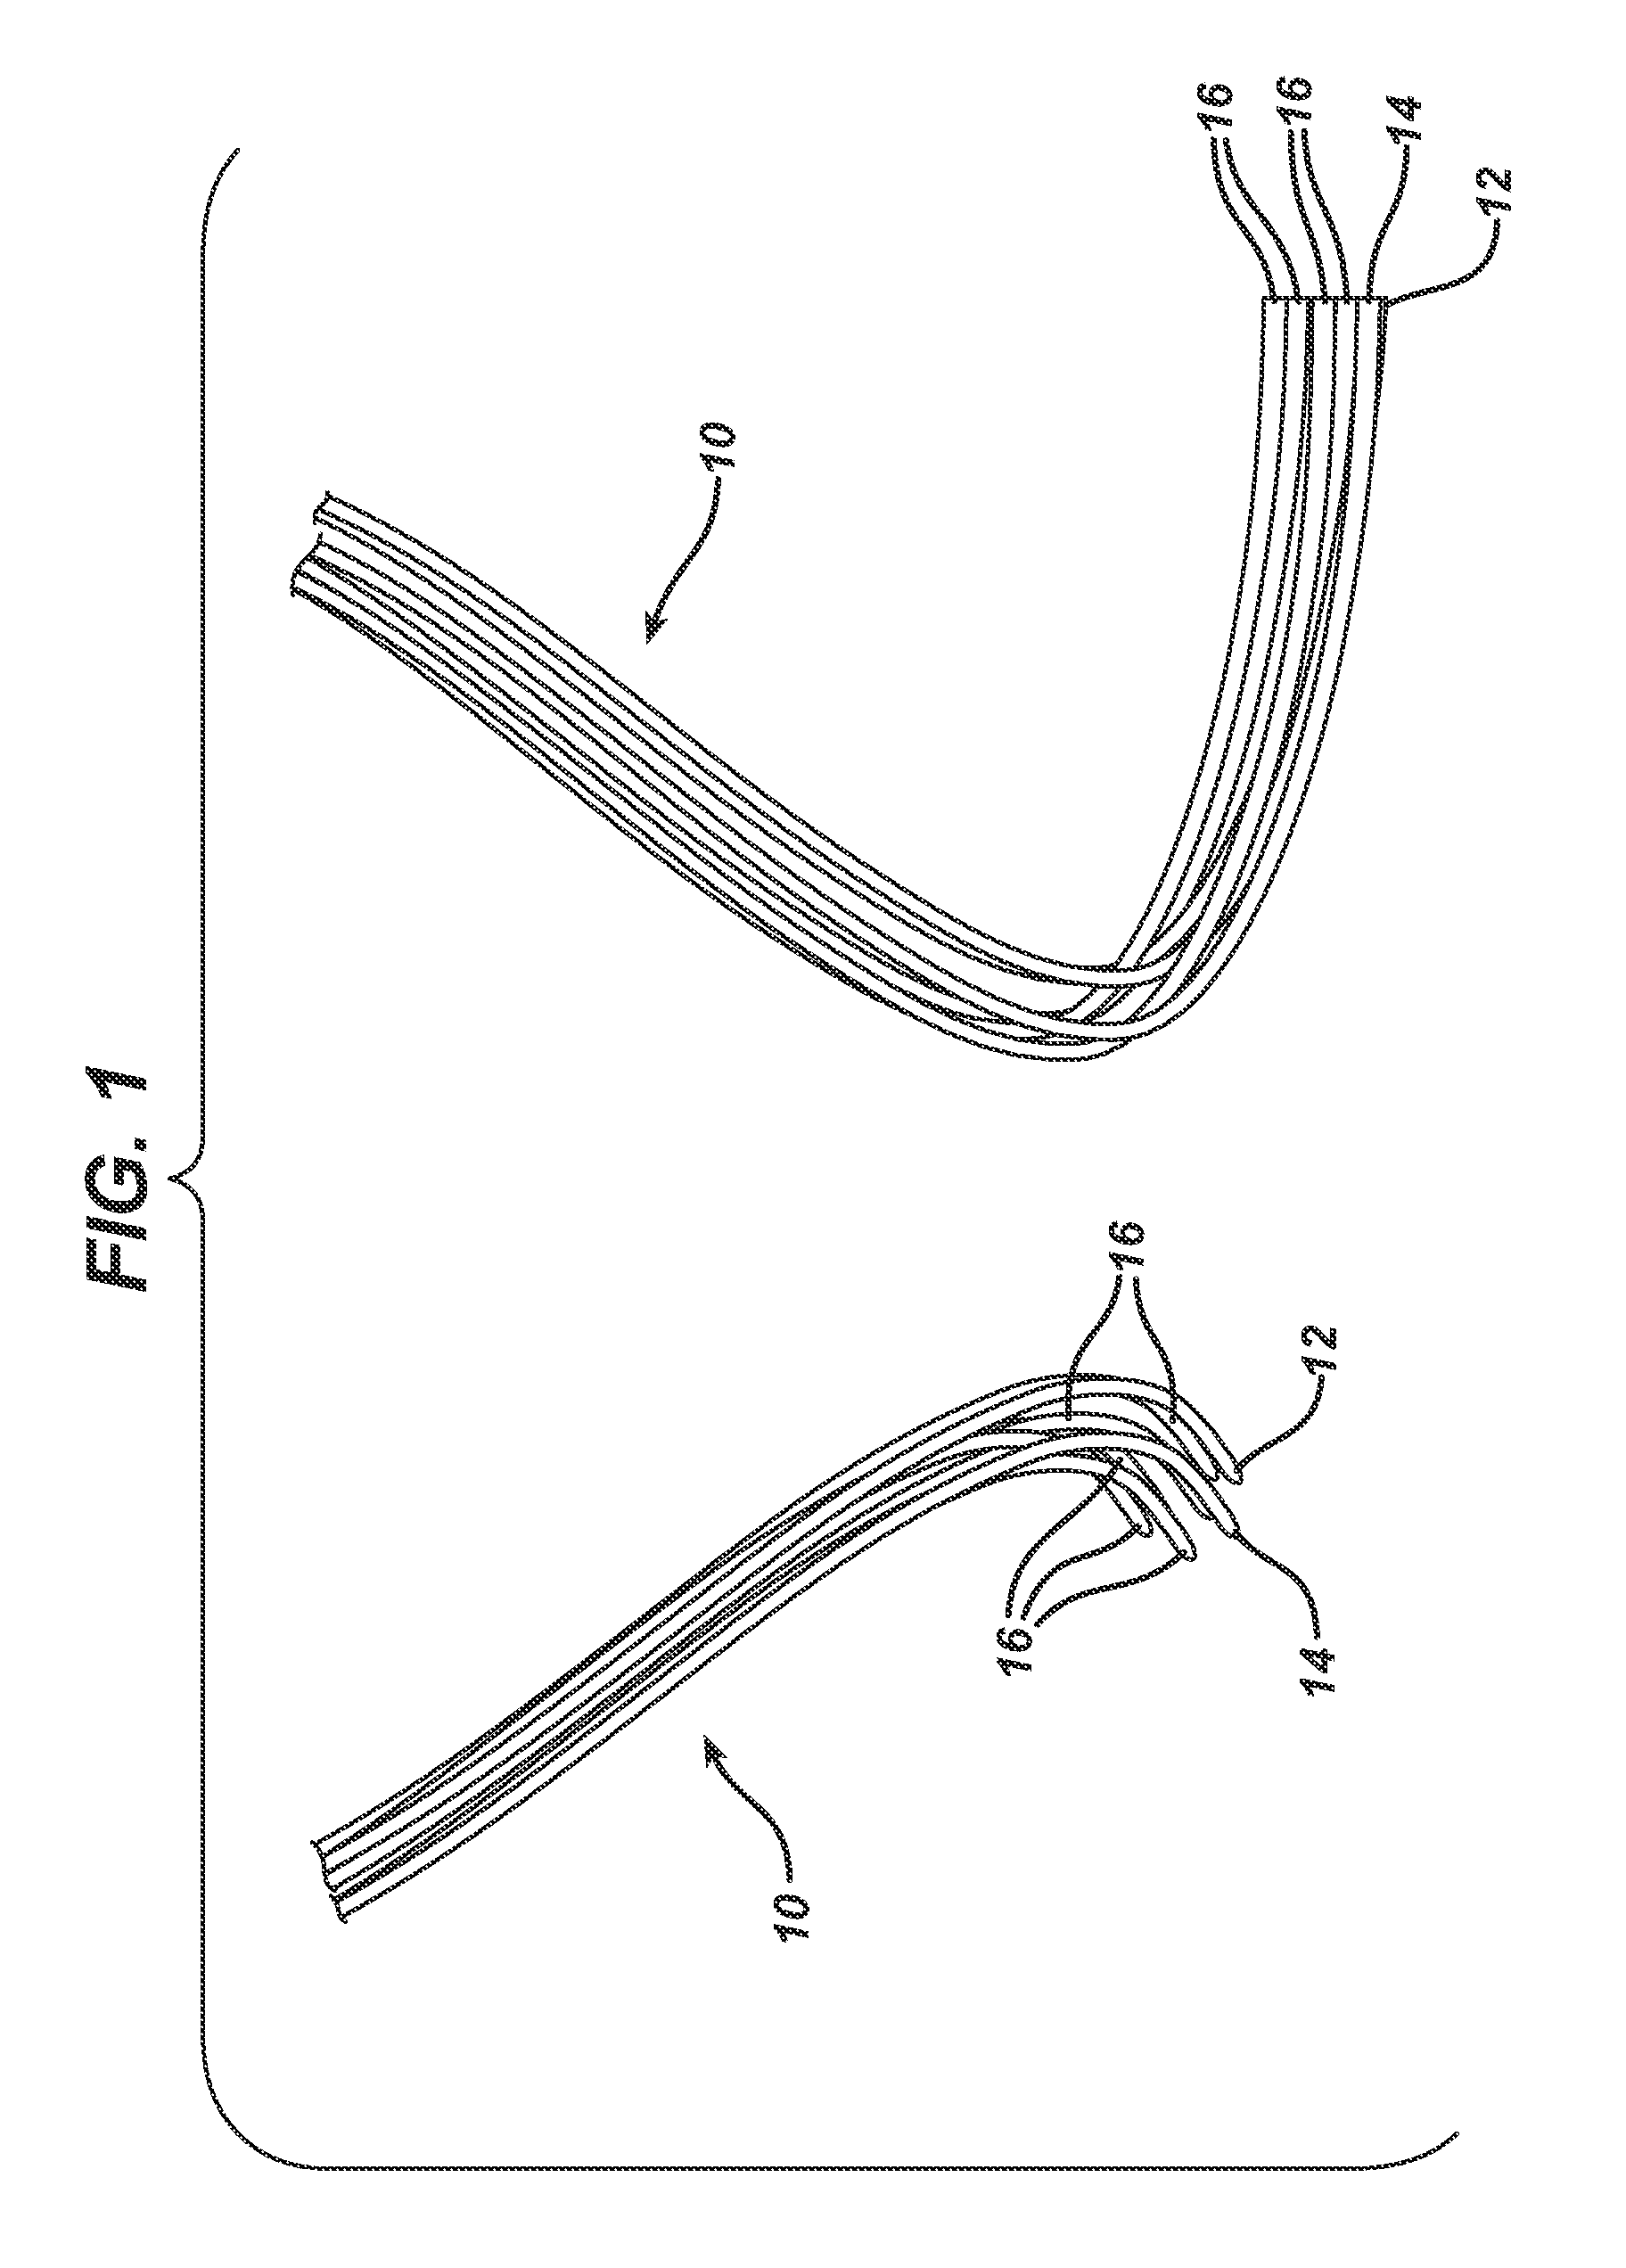 Method of forming an implantable device